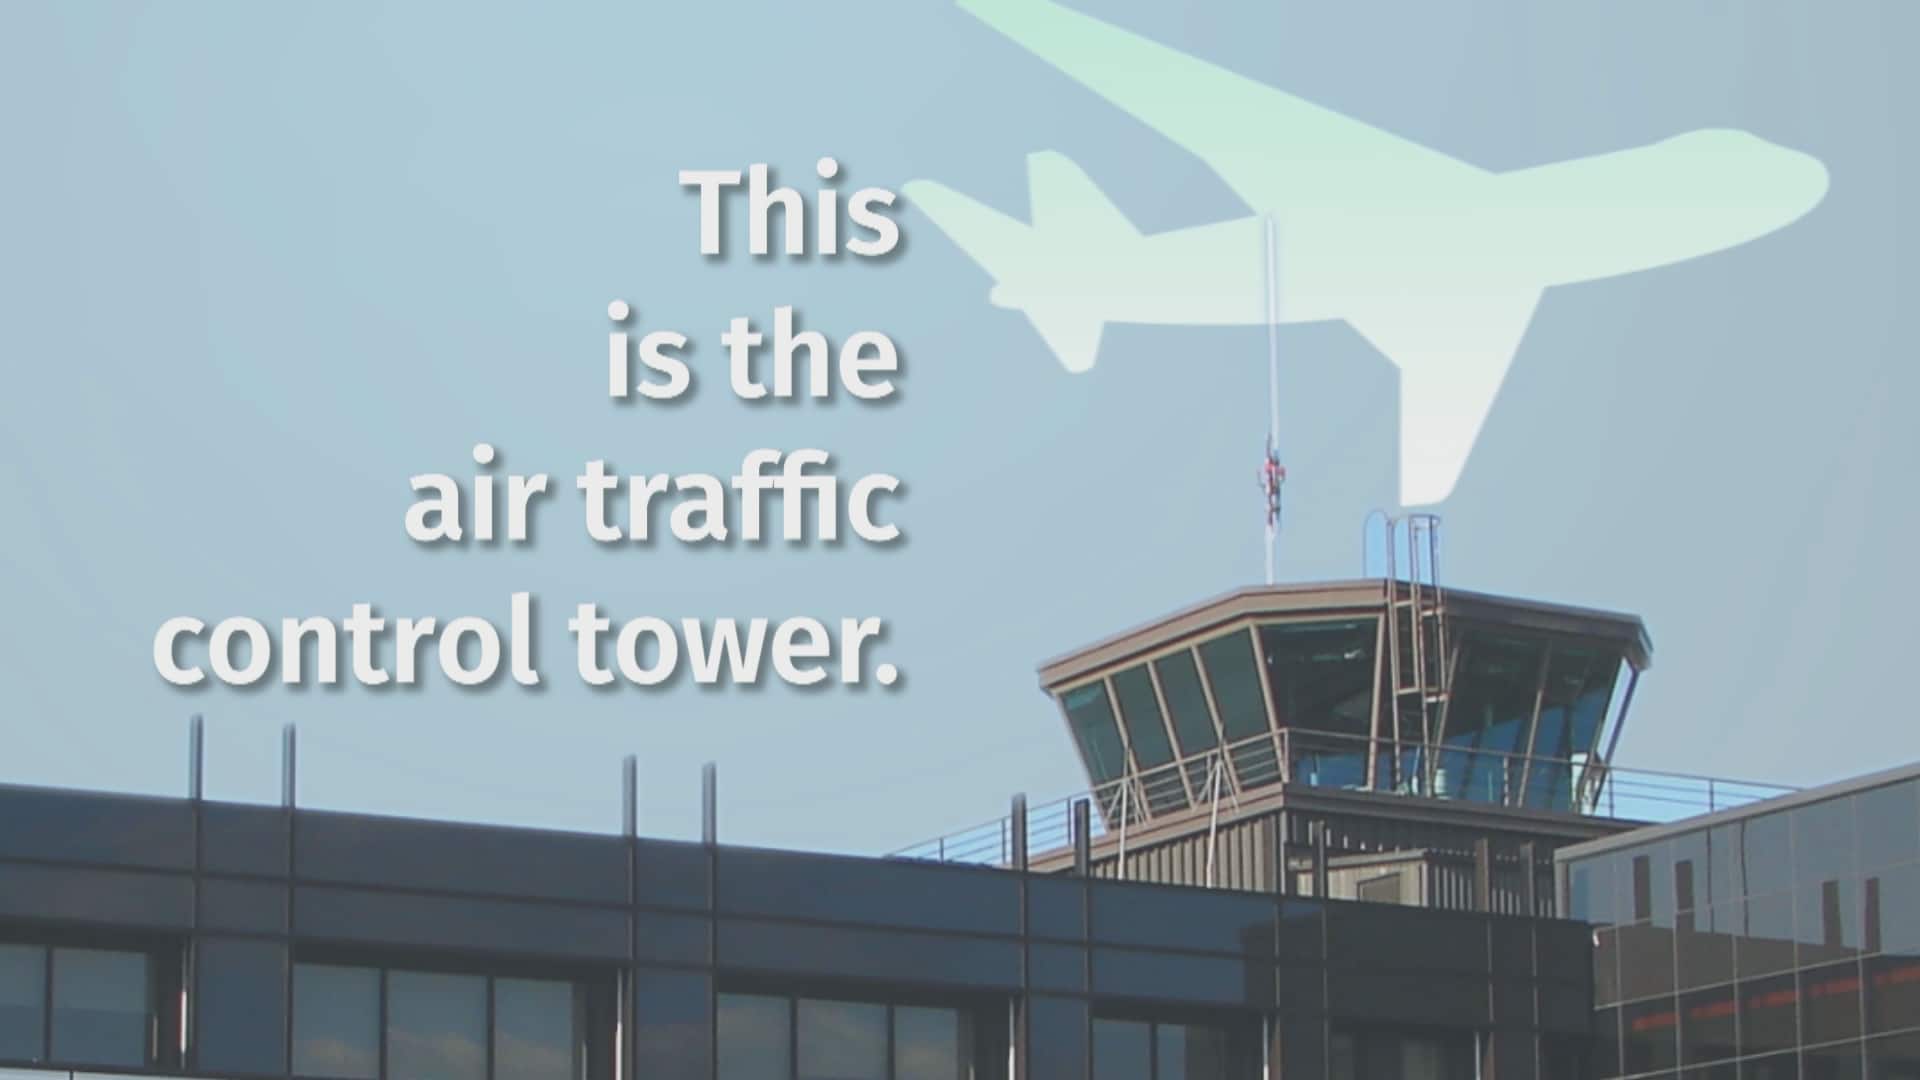 What would it mean if YQG lost its air traffic control tower?